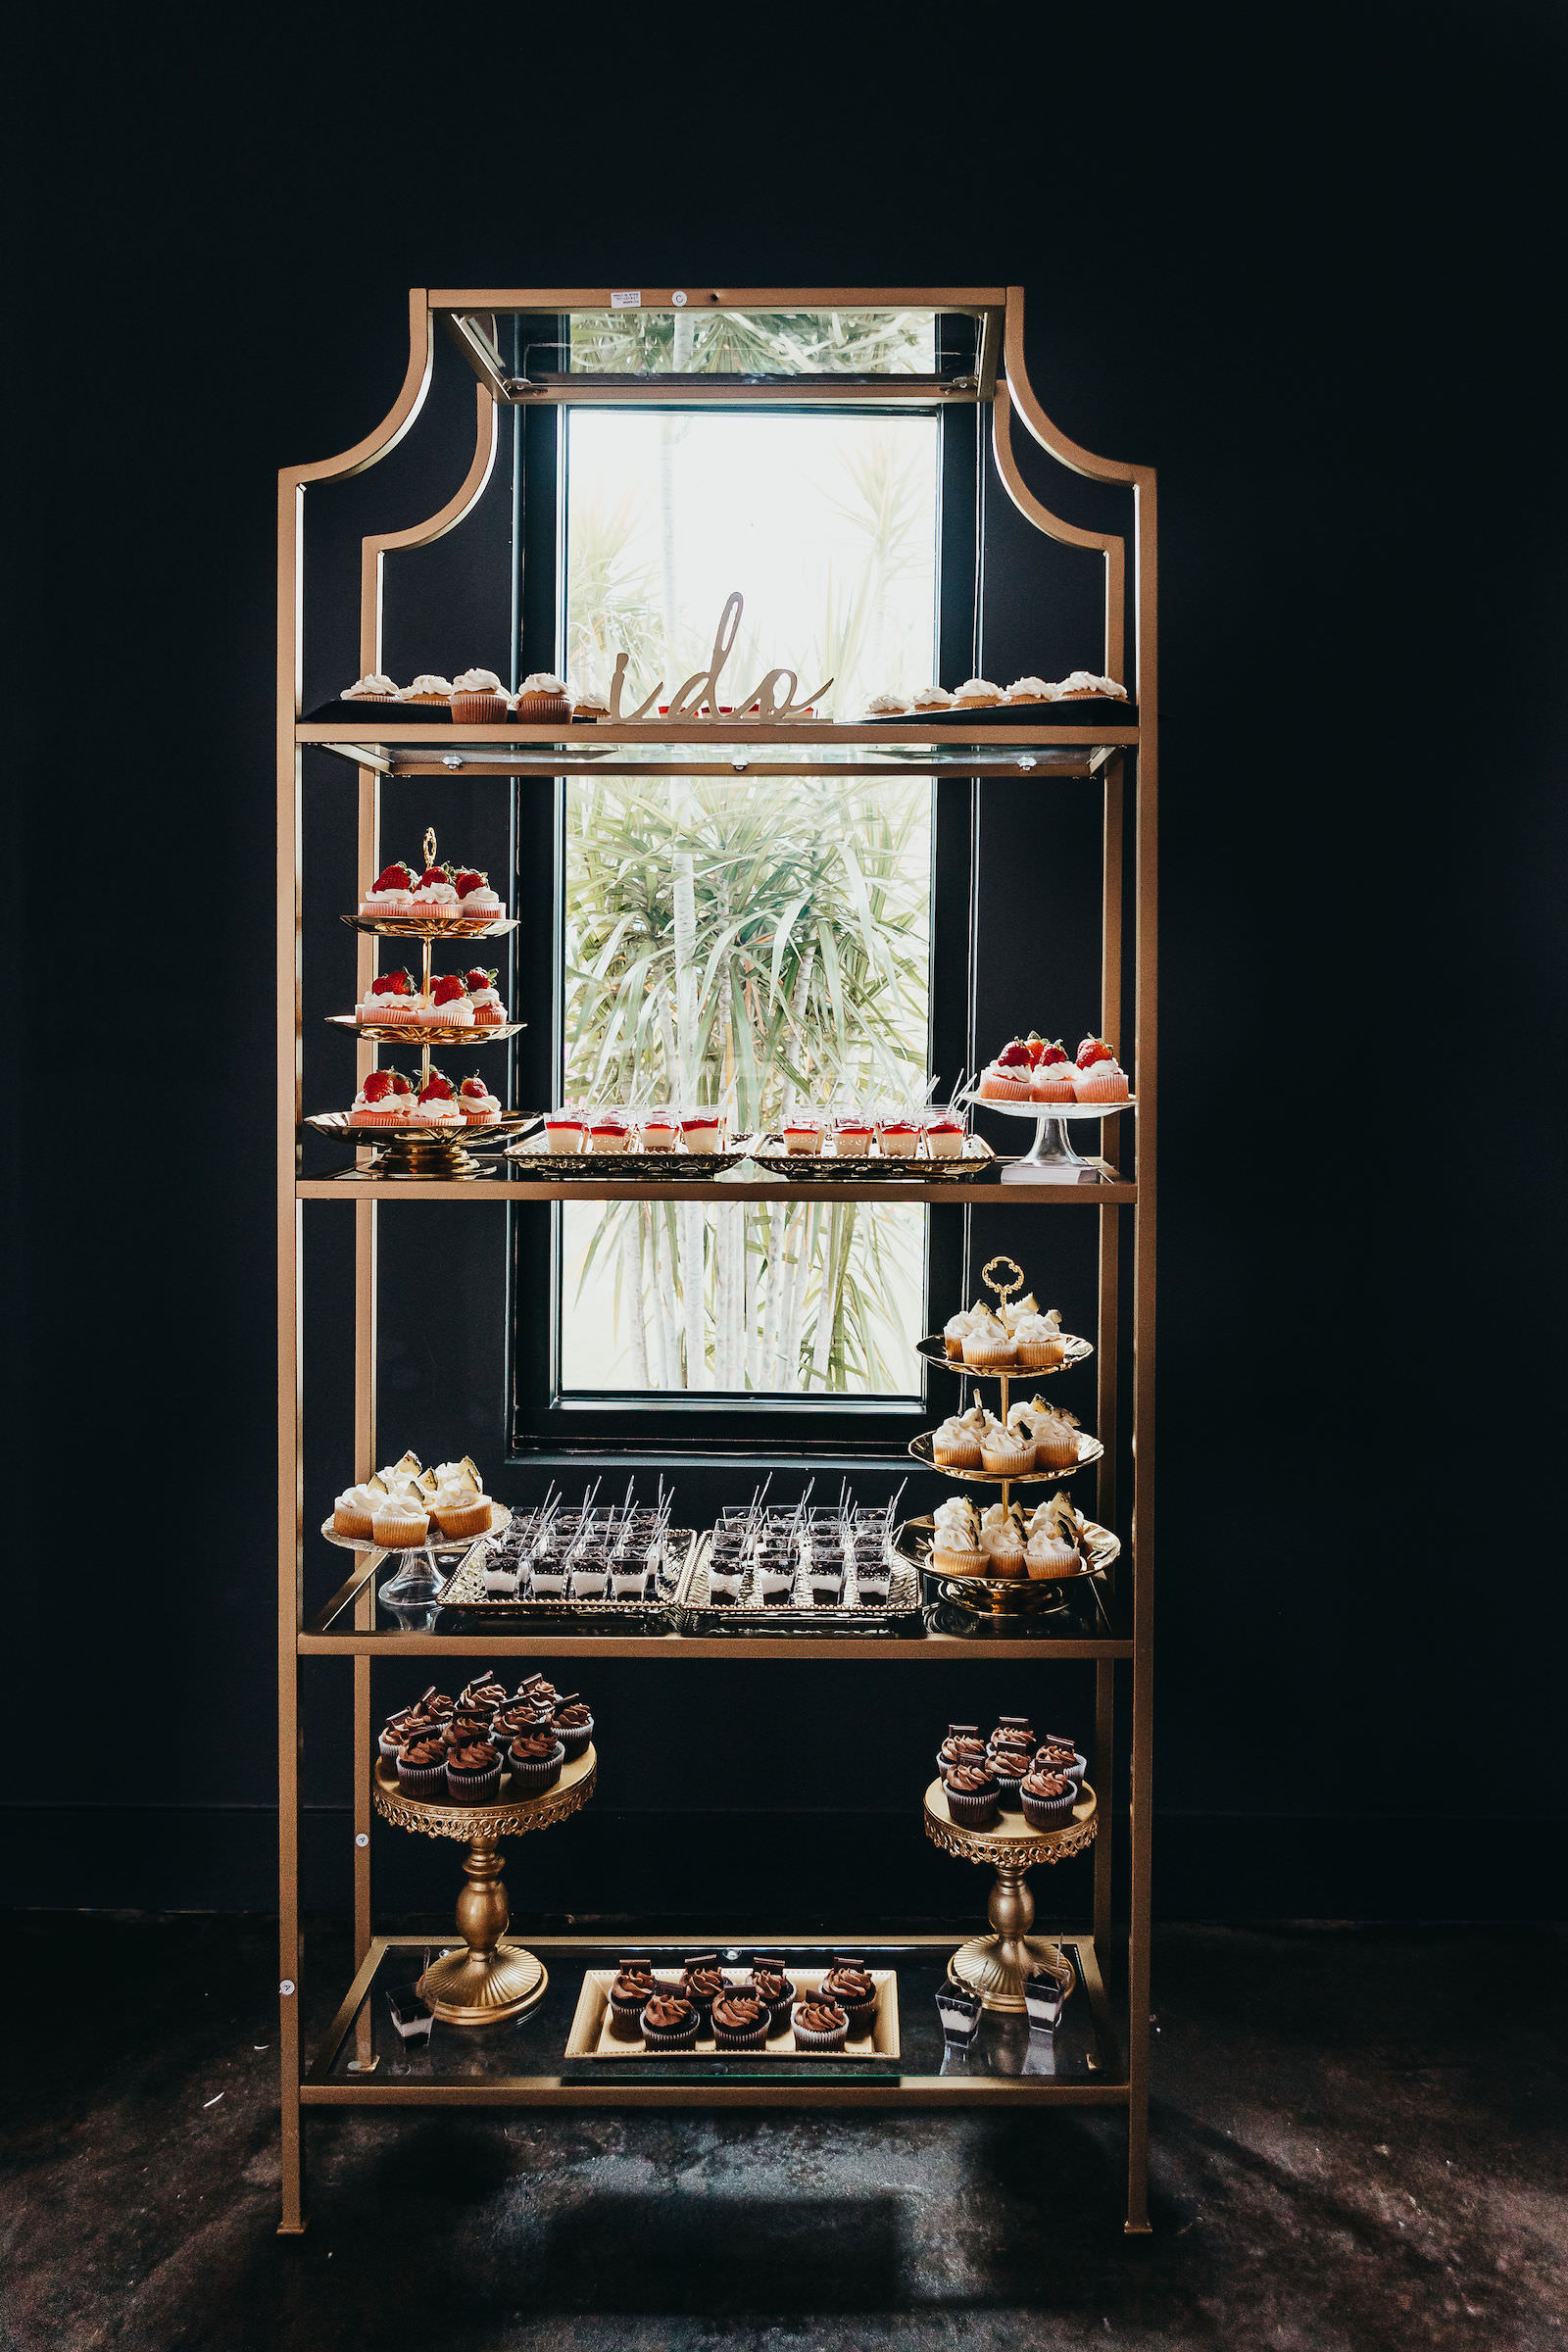 Wedding Dessert Gold Cart | Tampa Florida Catering Amici’s Catered Cuisine, Inc.